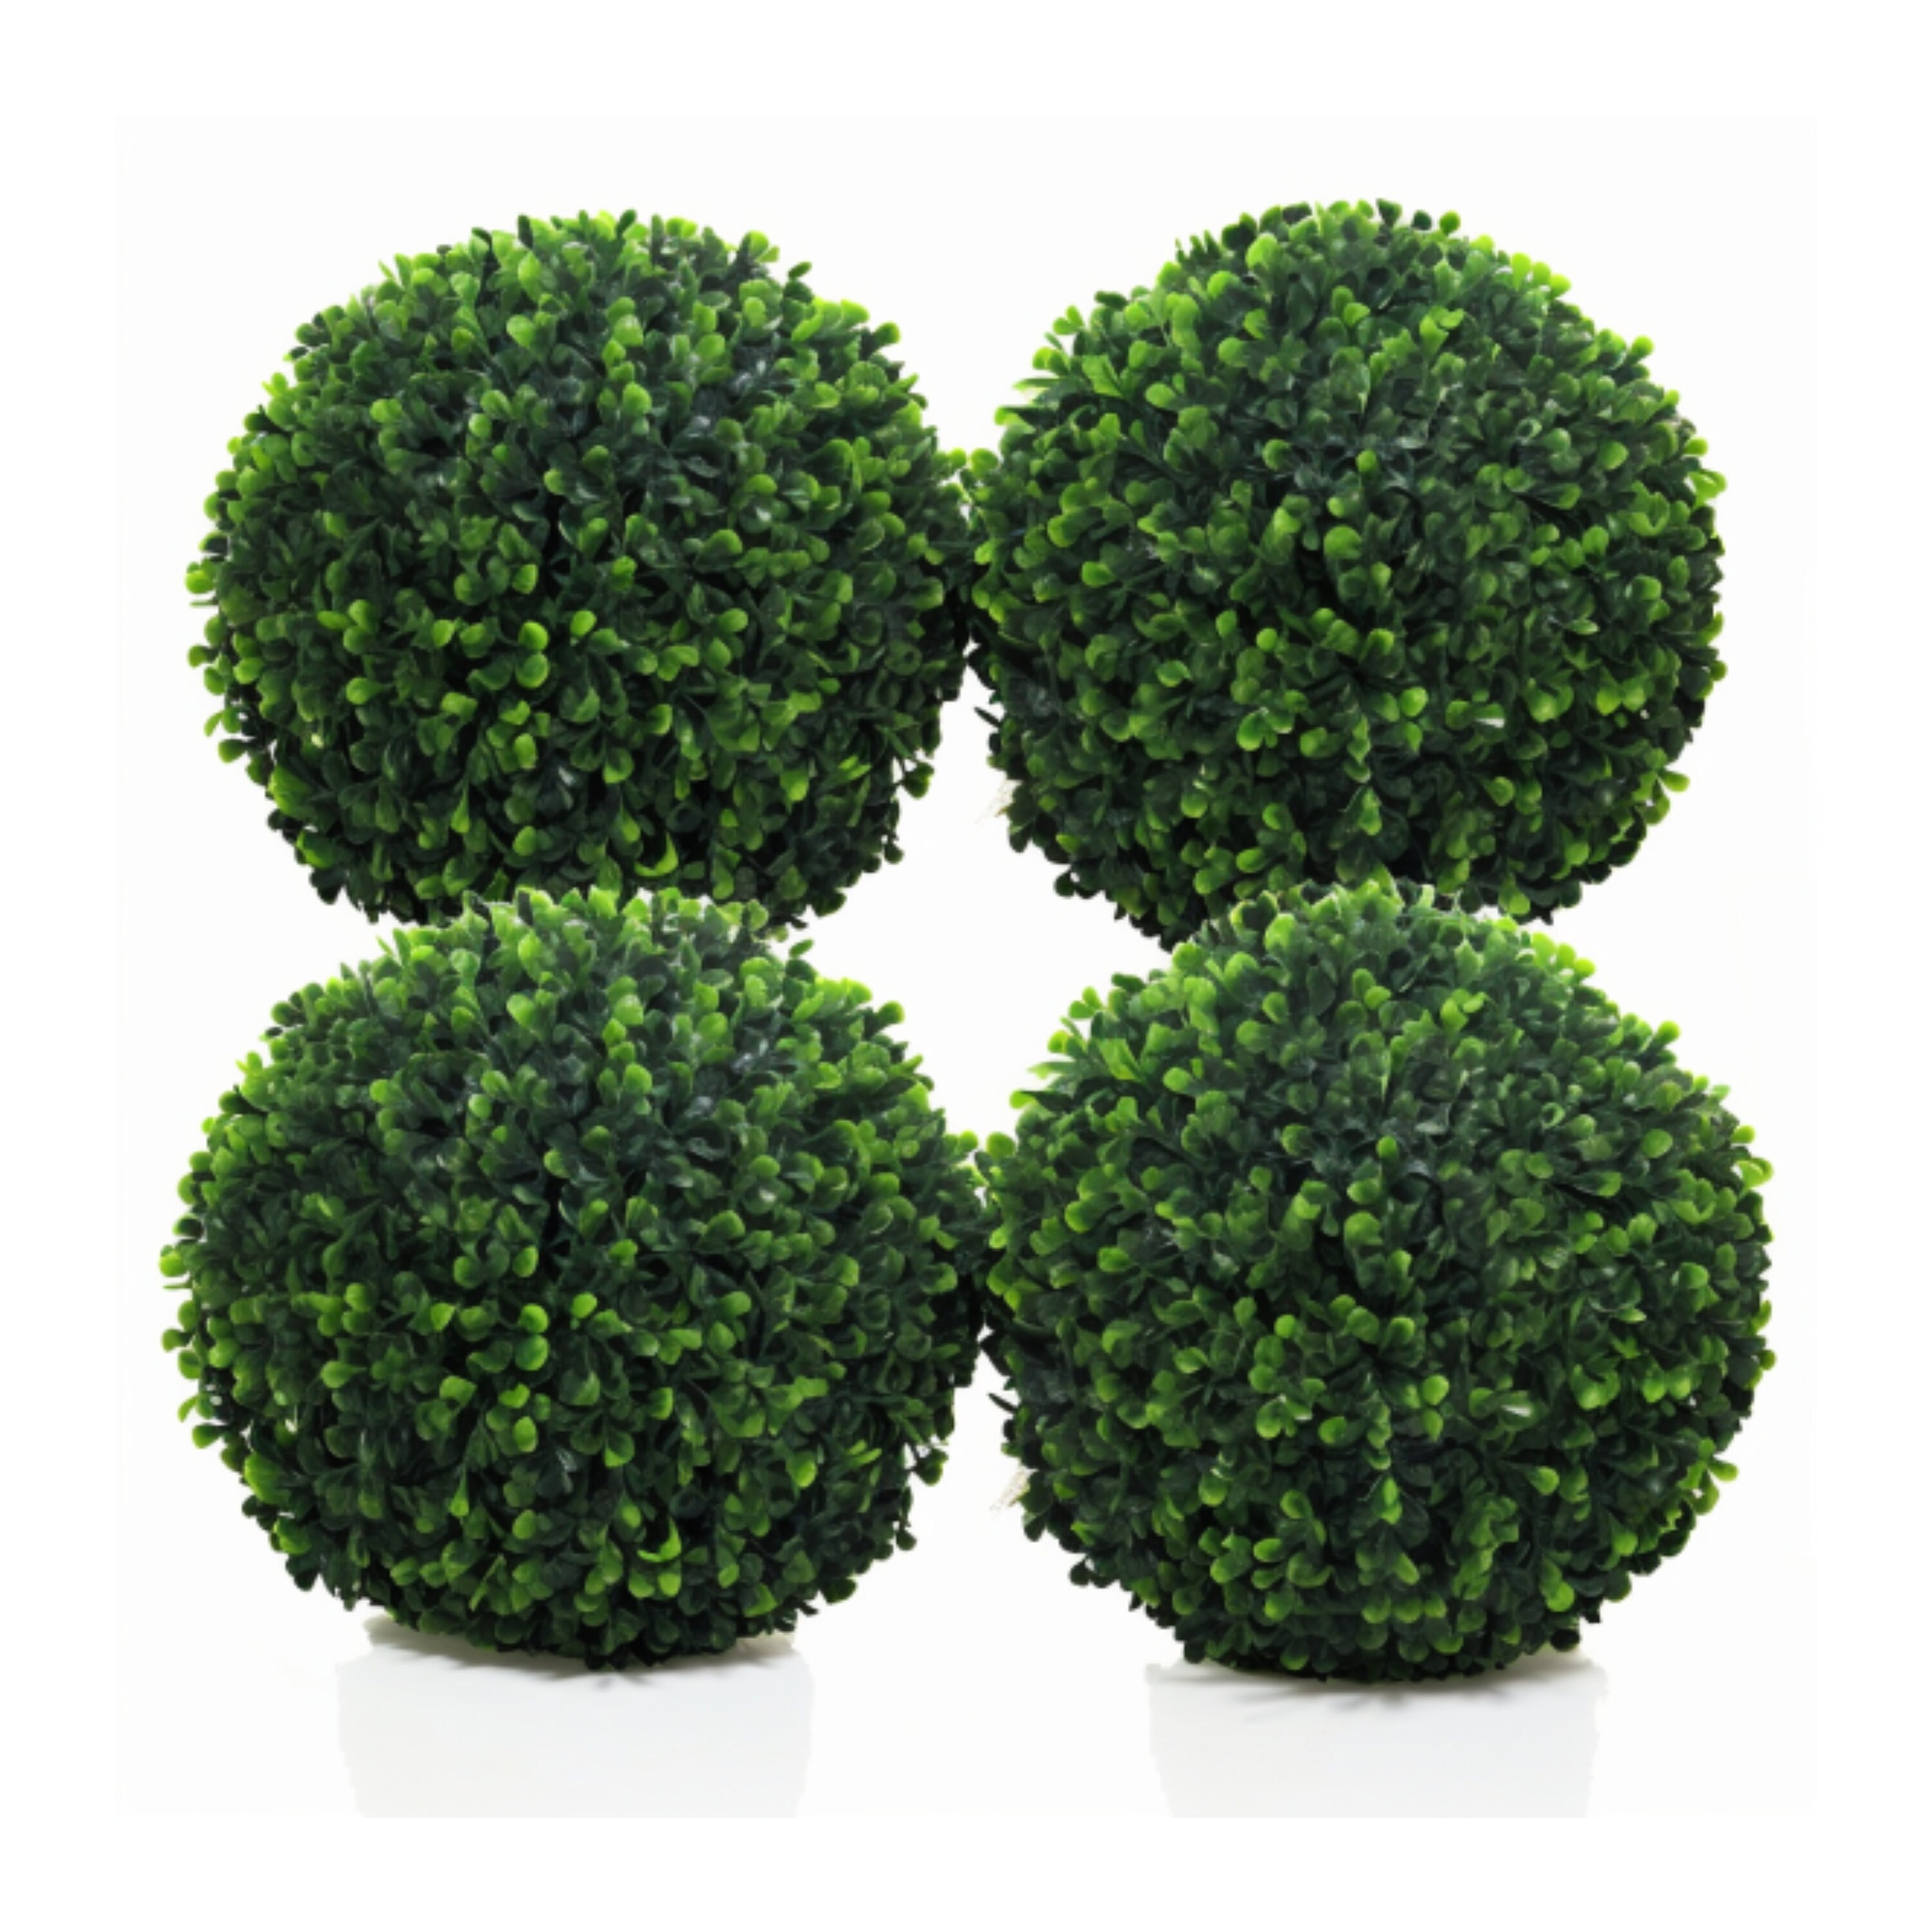 LIOOBO 3 Pcs with Flowers and Grass Ball Plant Ornament Bowl Filler  Greenery Balls Faux Boxwood Sphere simulate Green Balls Wreath Decor Green  Leaves